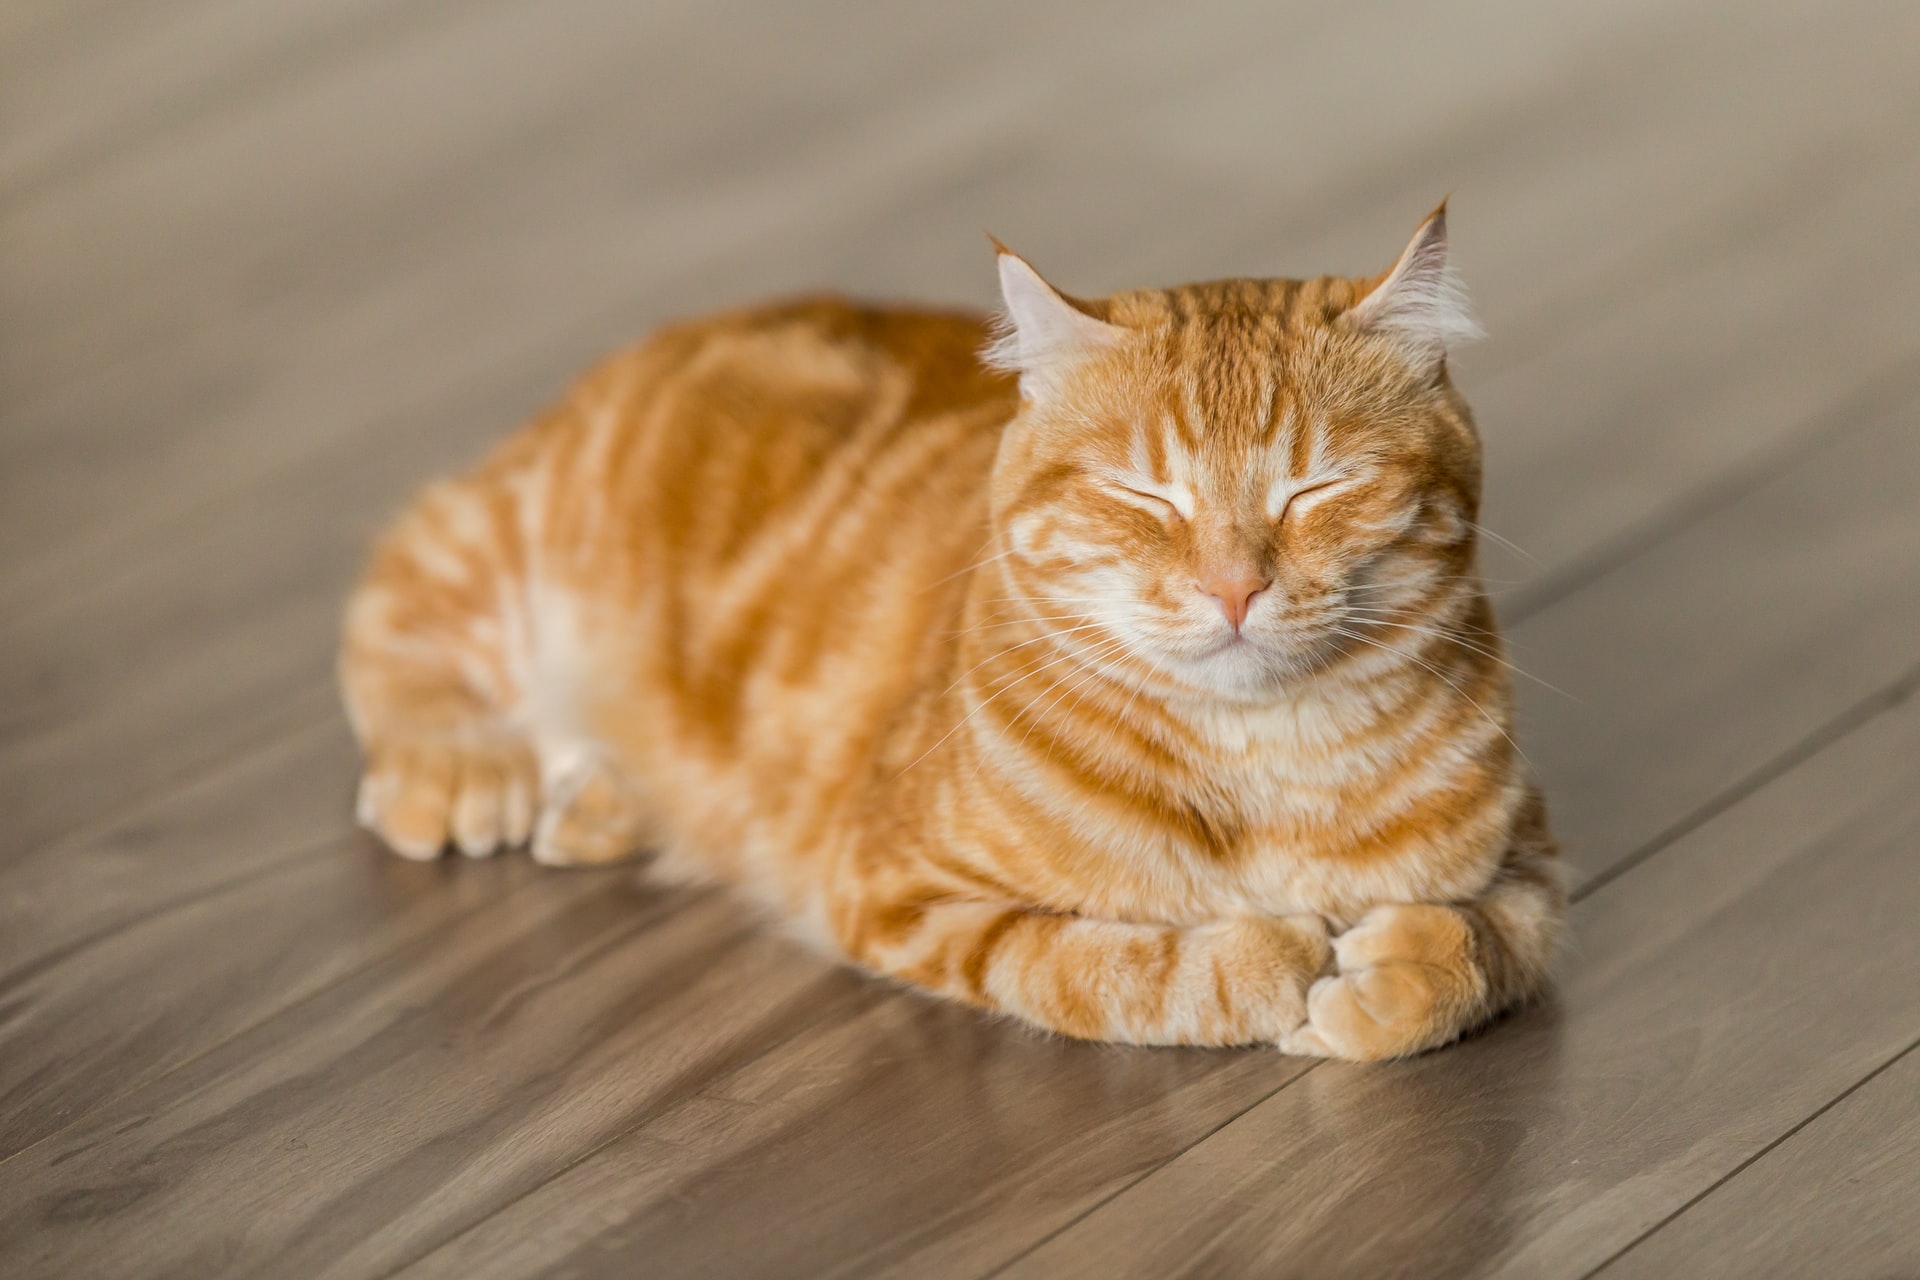 A cat in the house – what flooring to choose?